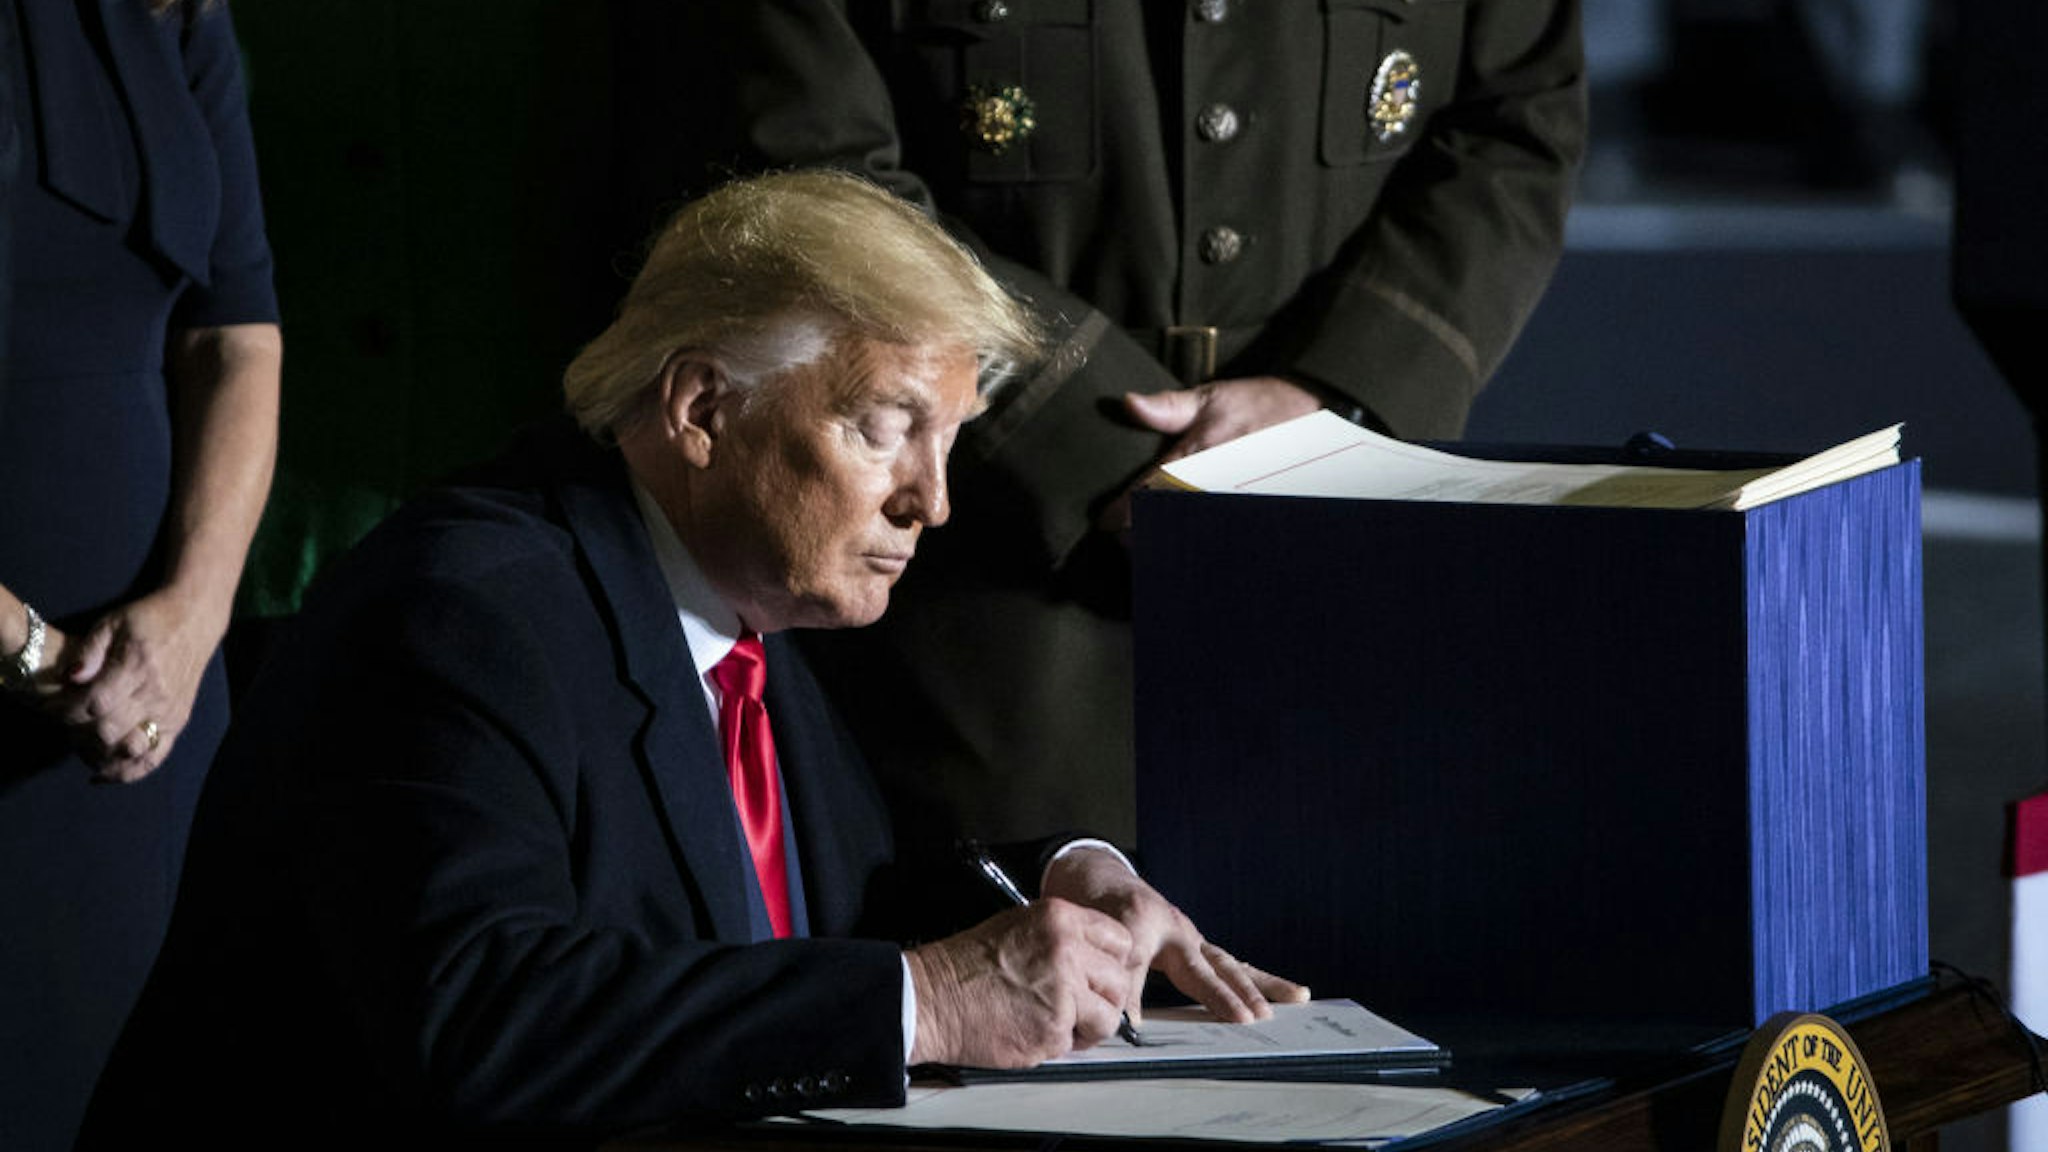 U.S. President Donald Trump signs the National Defense Authorization Act for Fiscal Year 2020 during a ceremony at Joint Base Andrews, Maryland, U.S., on Friday, Dec. 20, 2019.